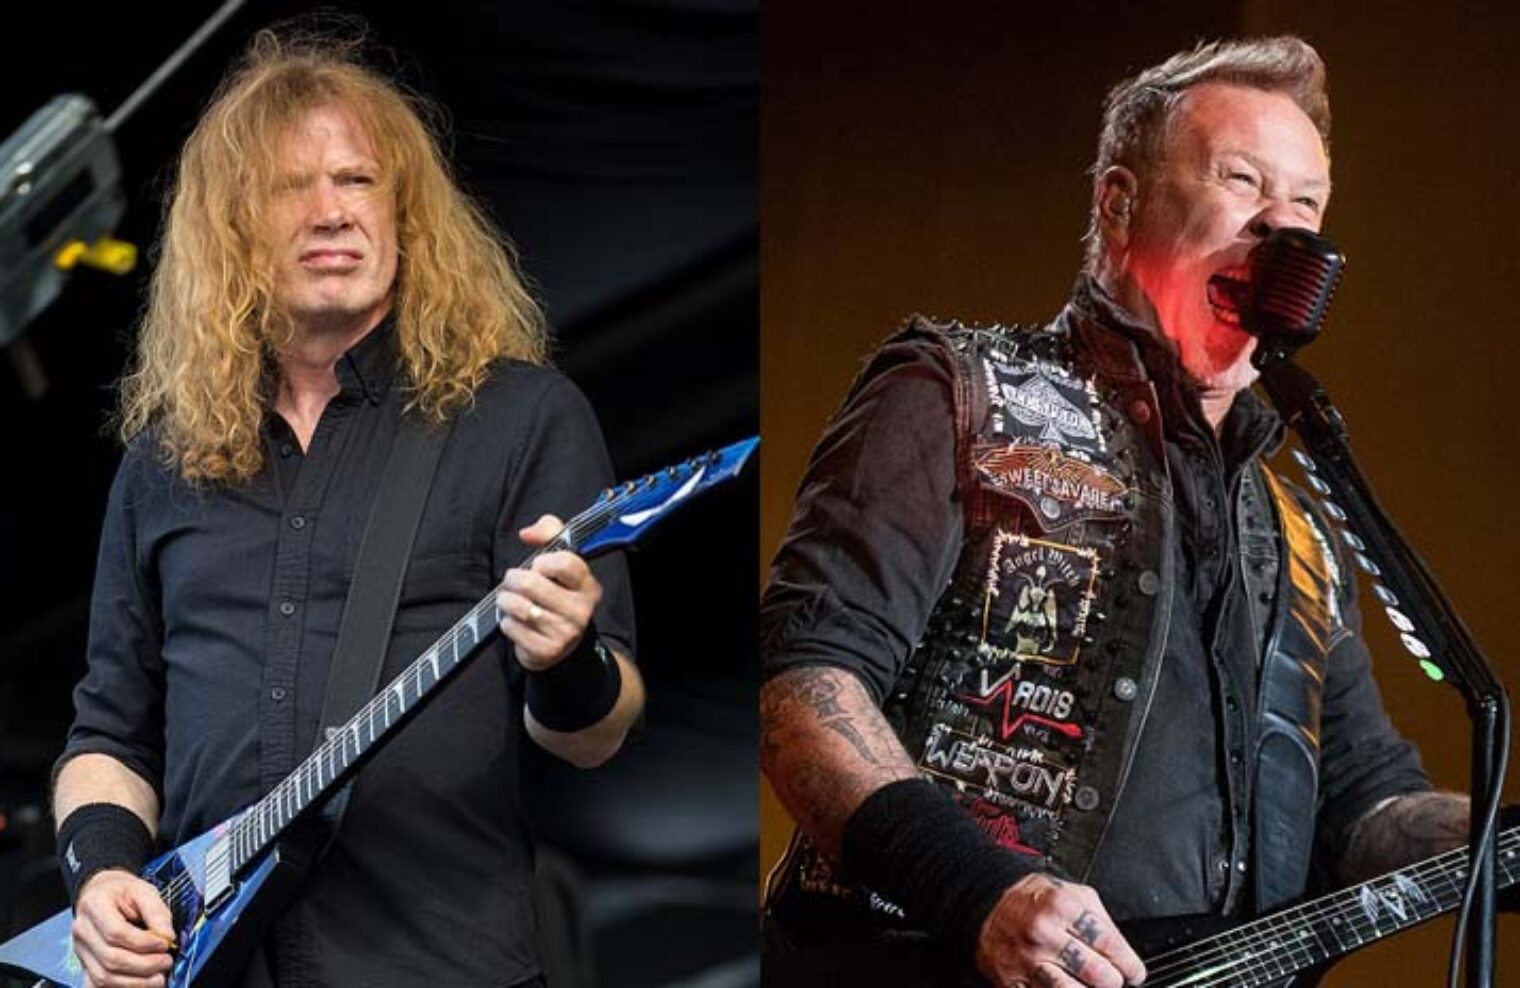 Dave Mustaine Talks About Working With James Hetfield On New Music ...